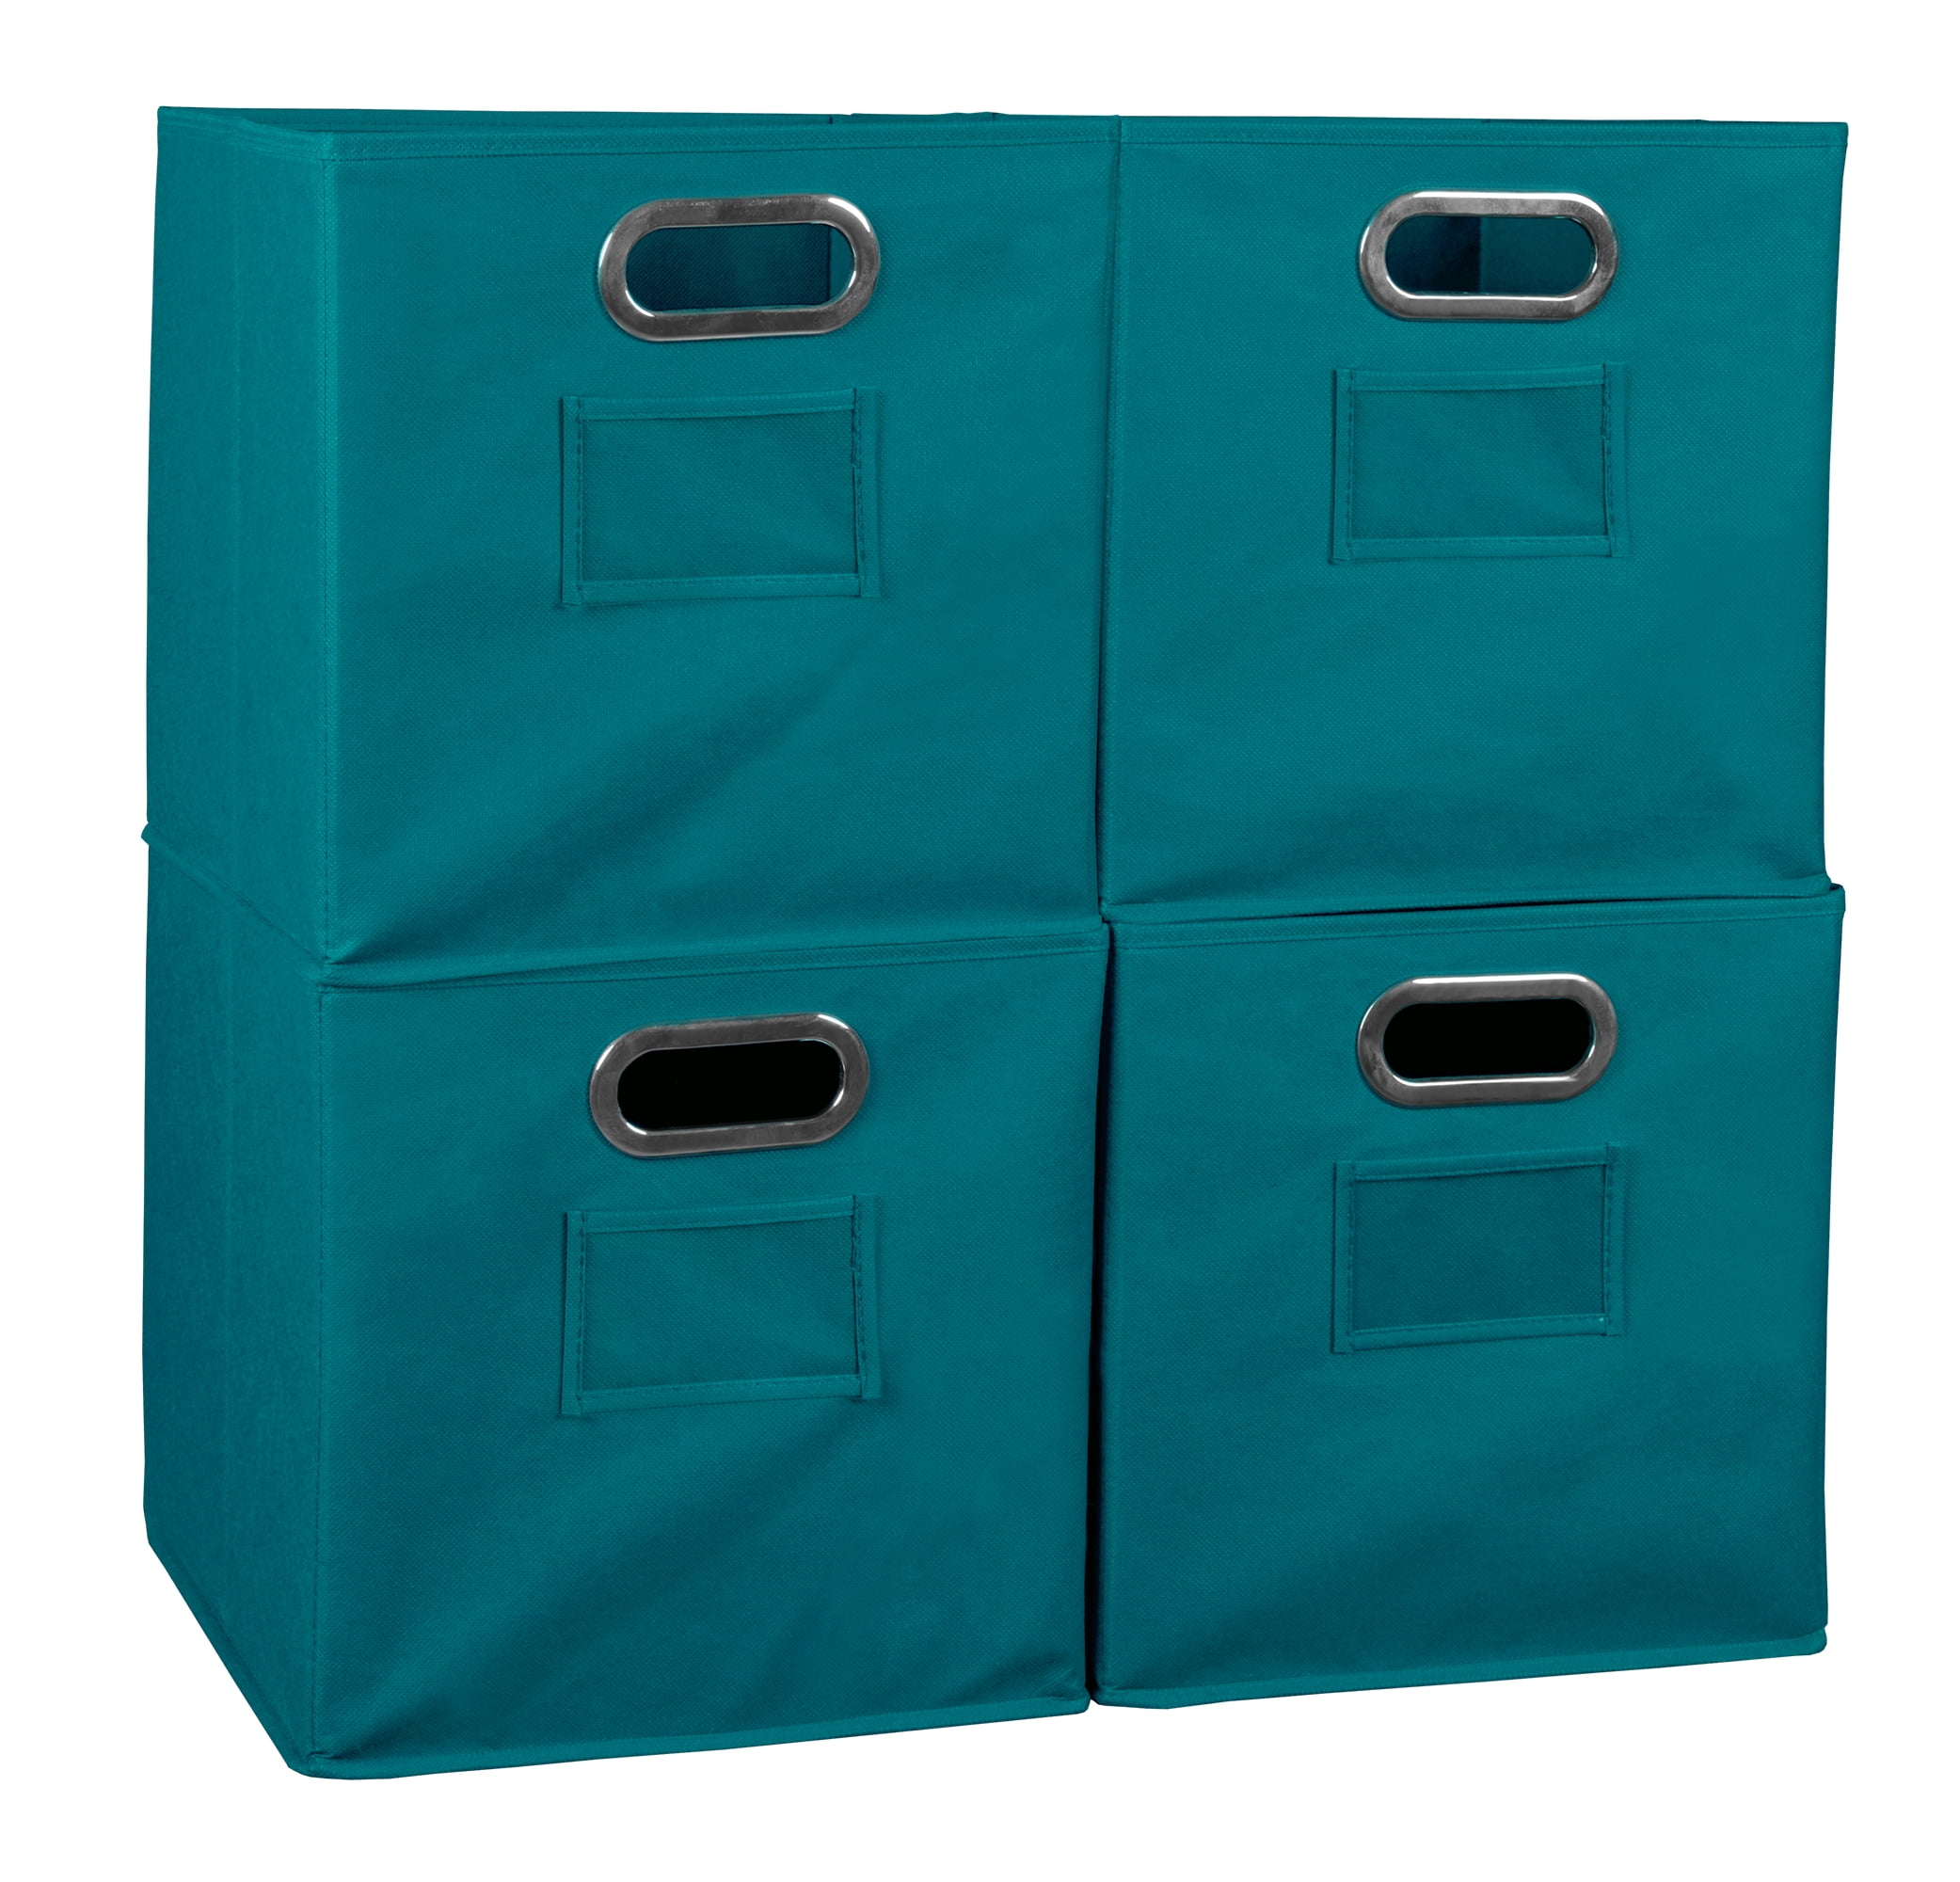 Collapsible Home Storage Set of 4 Foldable Fabric Storage Bins- Teal ...